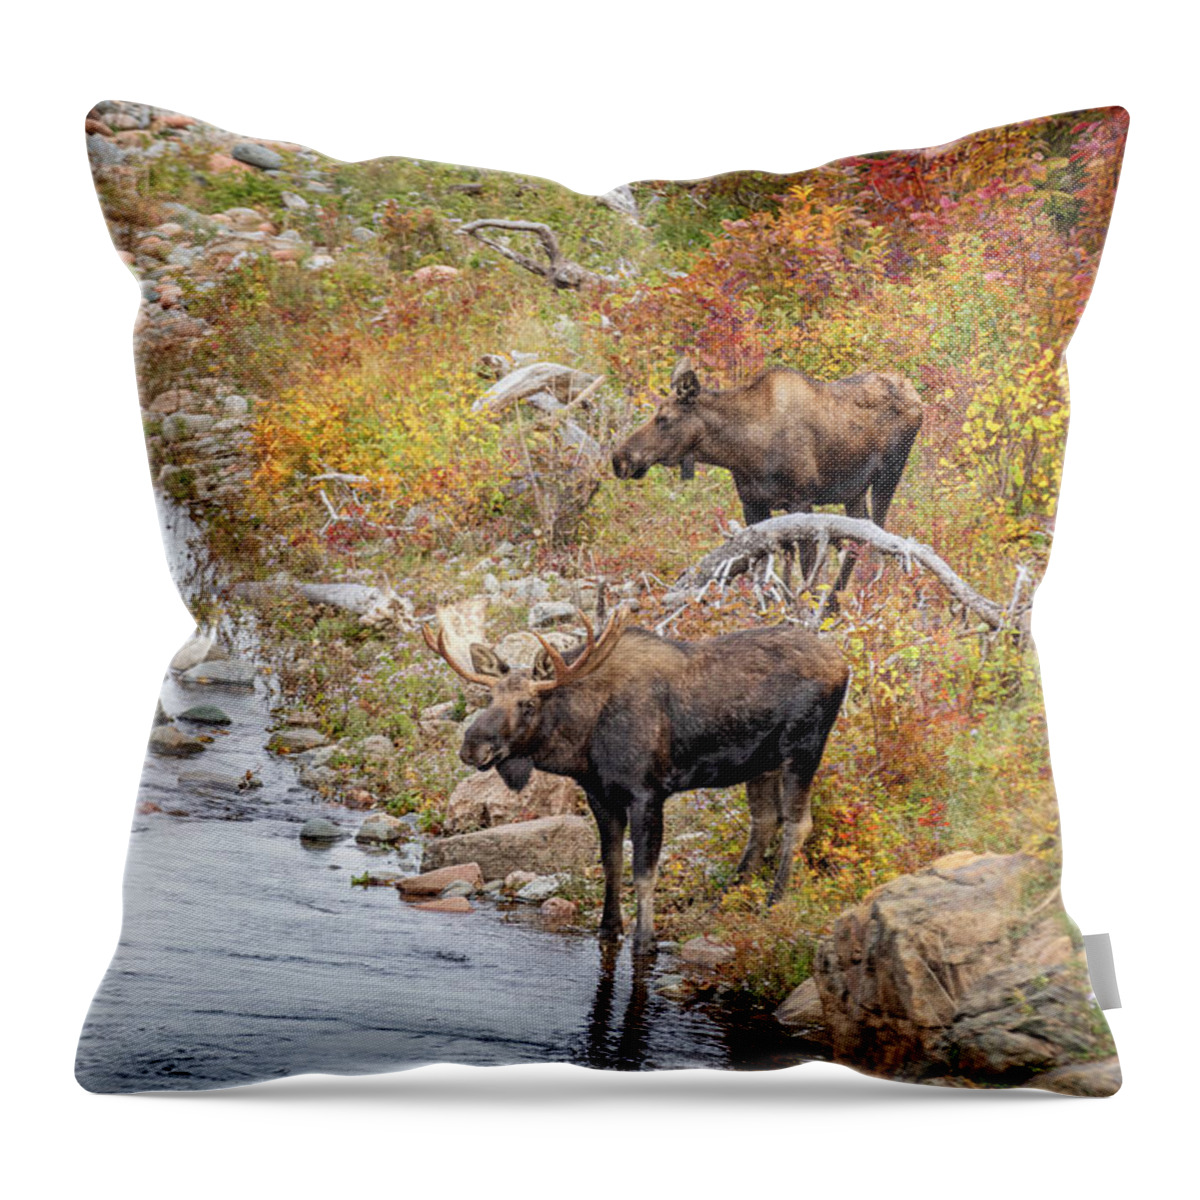 Cabot Trail Throw Pillow featuring the photograph The Watering Hole by Manpreet Sokhi